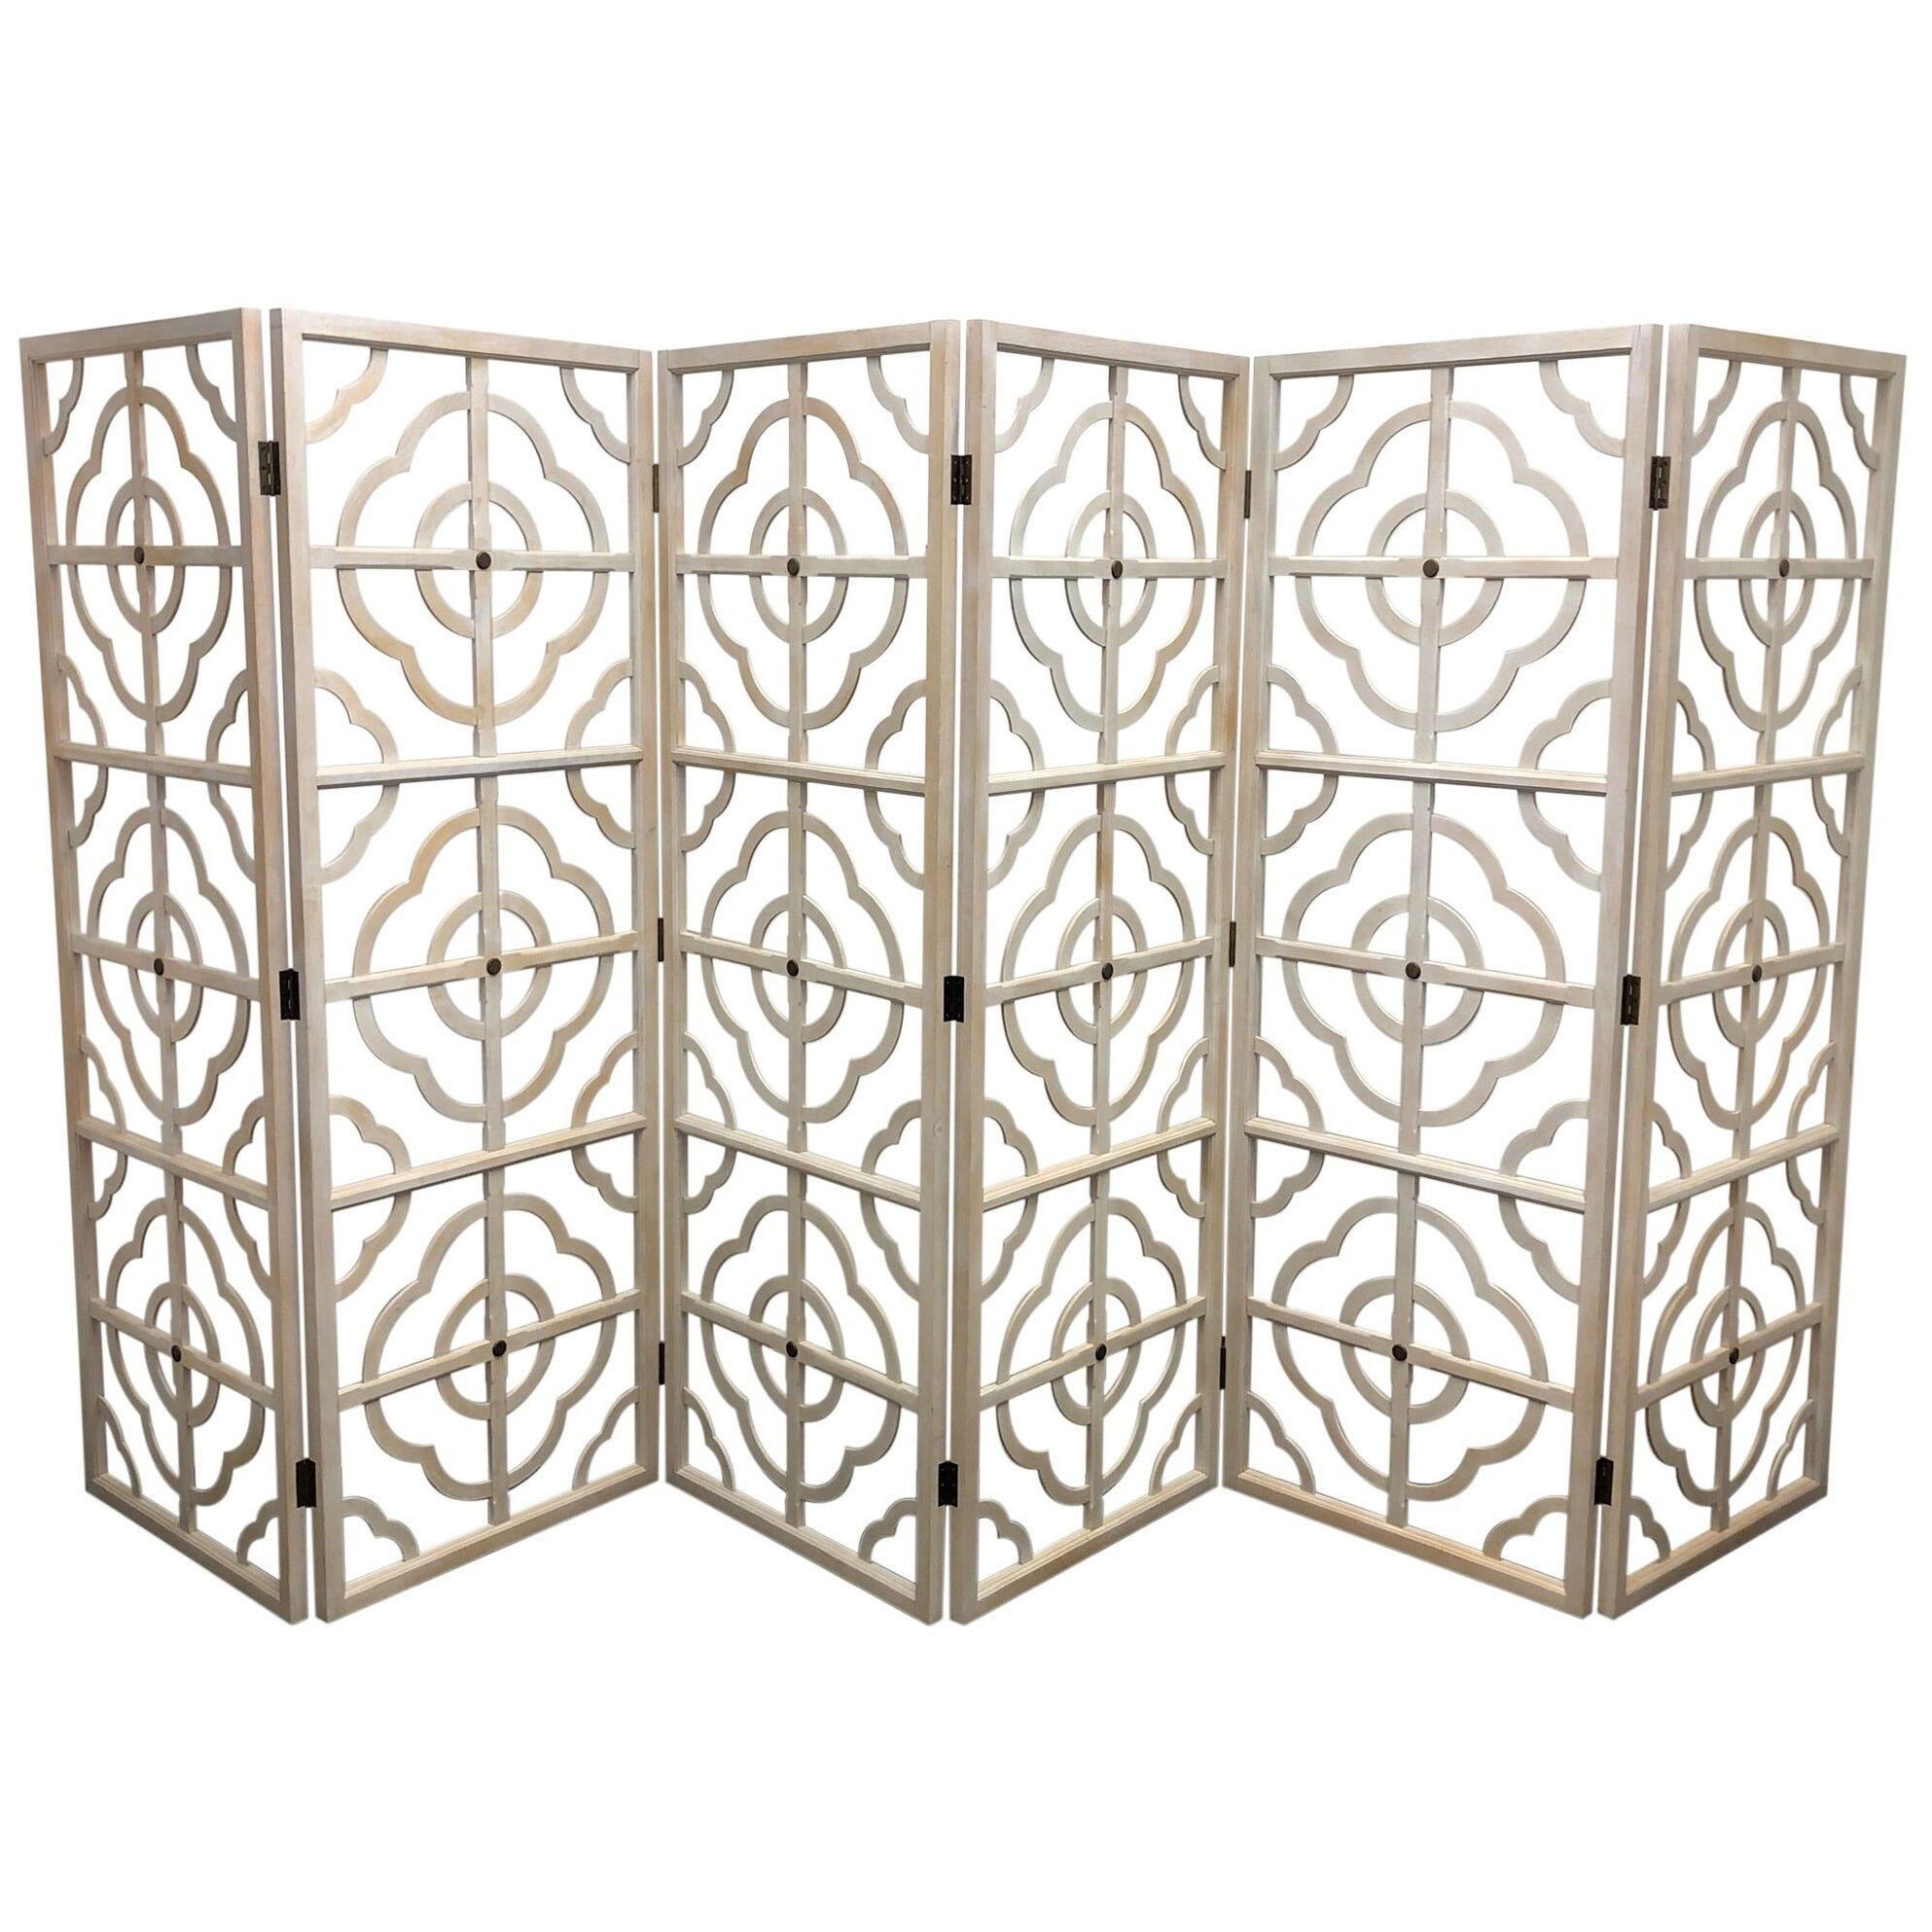 White Washed Oak and Aged Brass Six Panel Folding Screen by Steve Chase